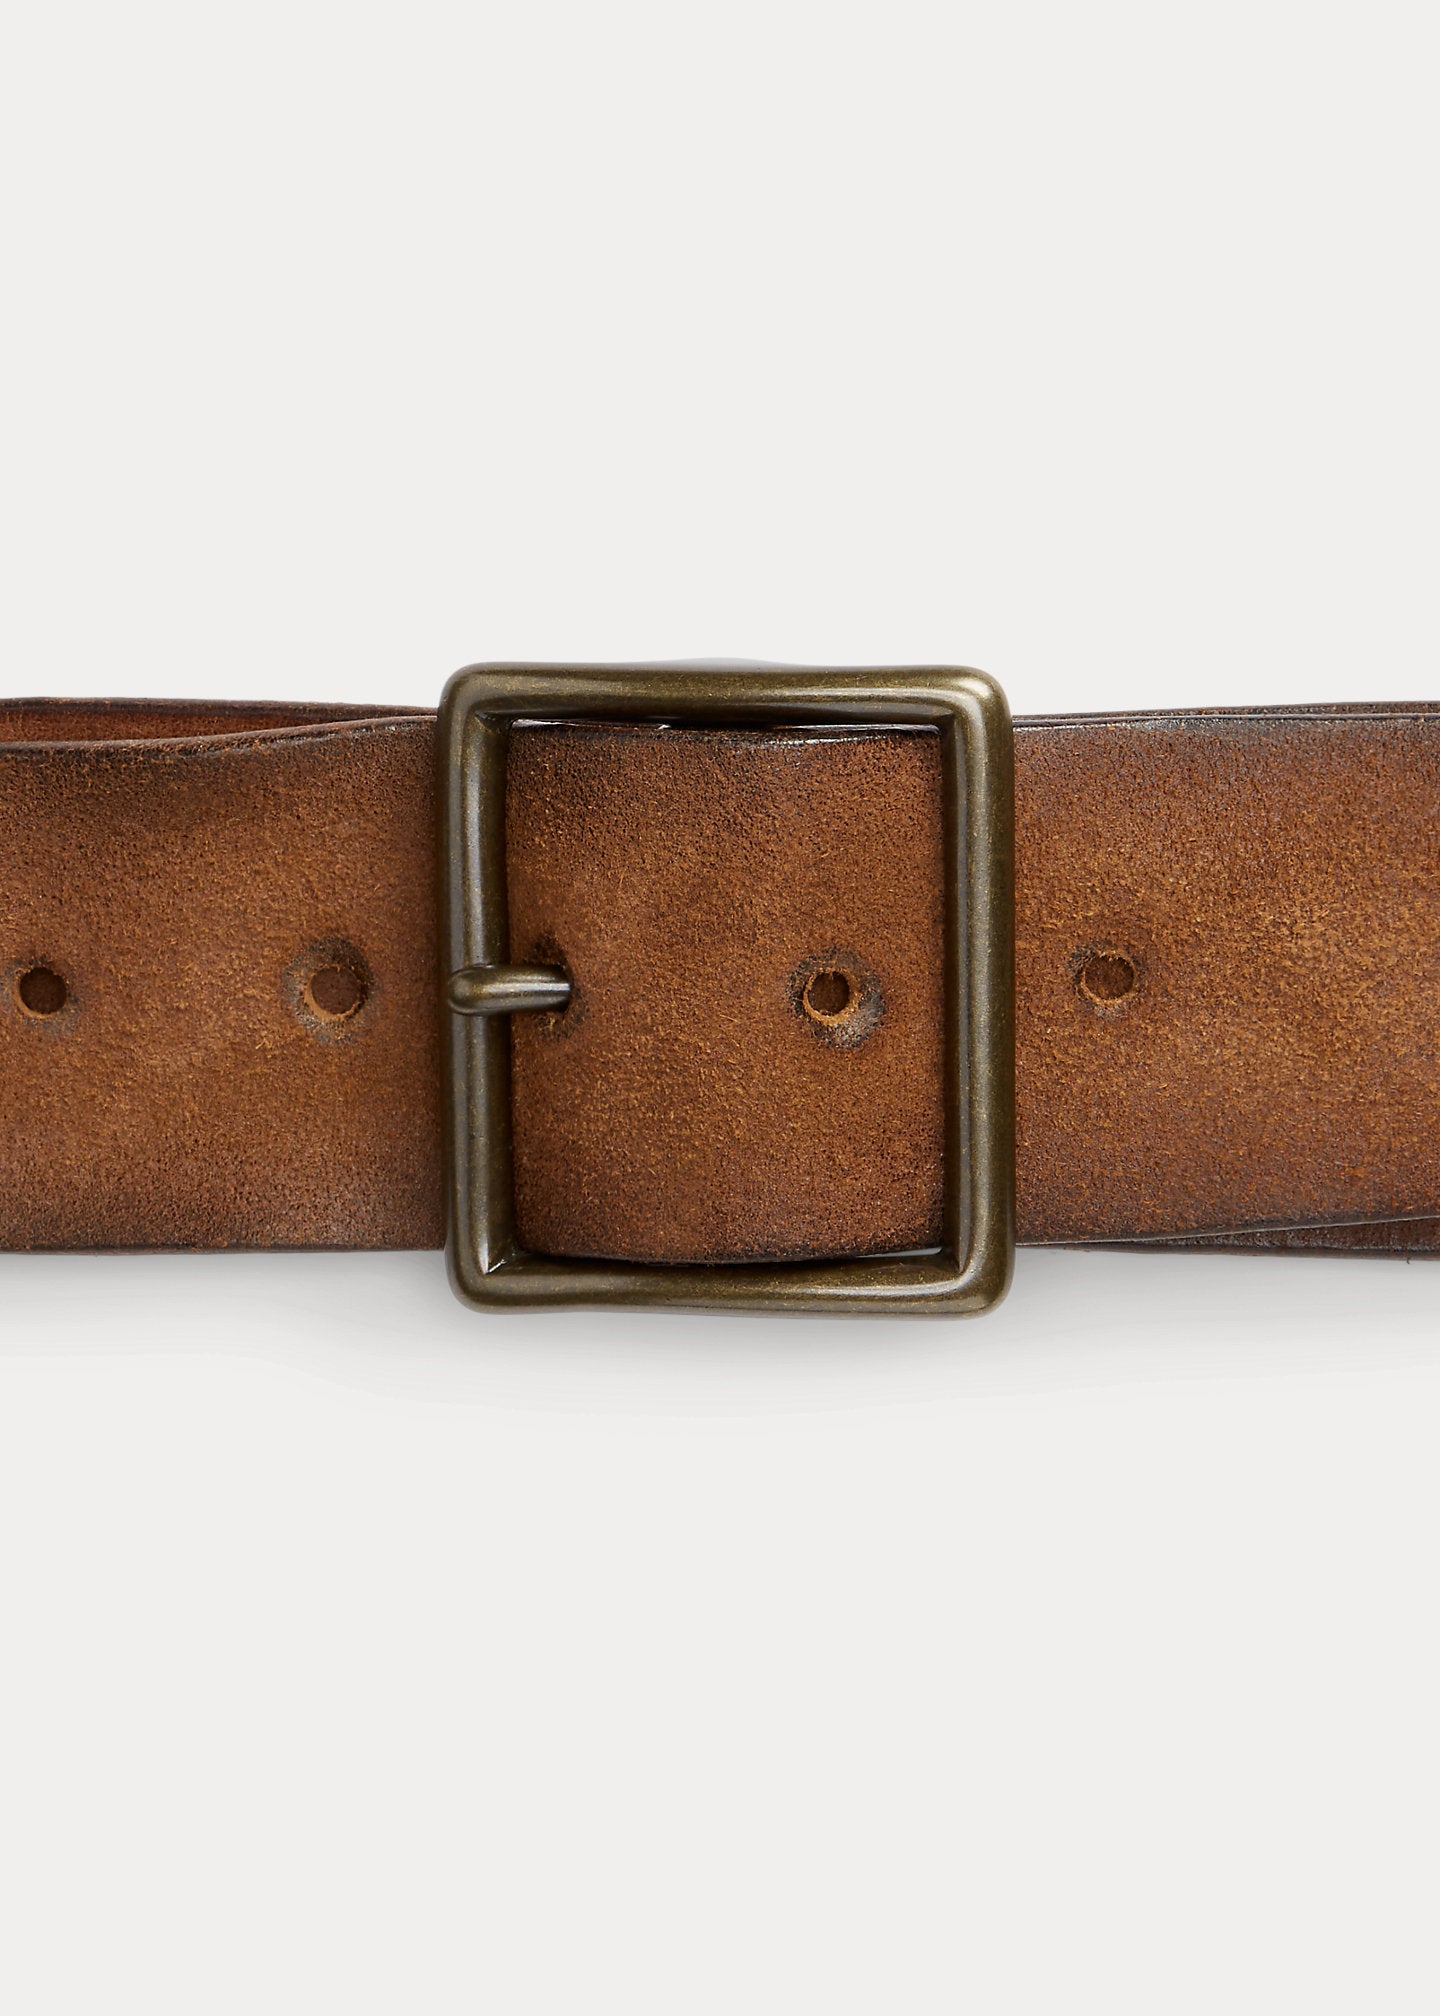 RRL Studded Roughout Leather Belt